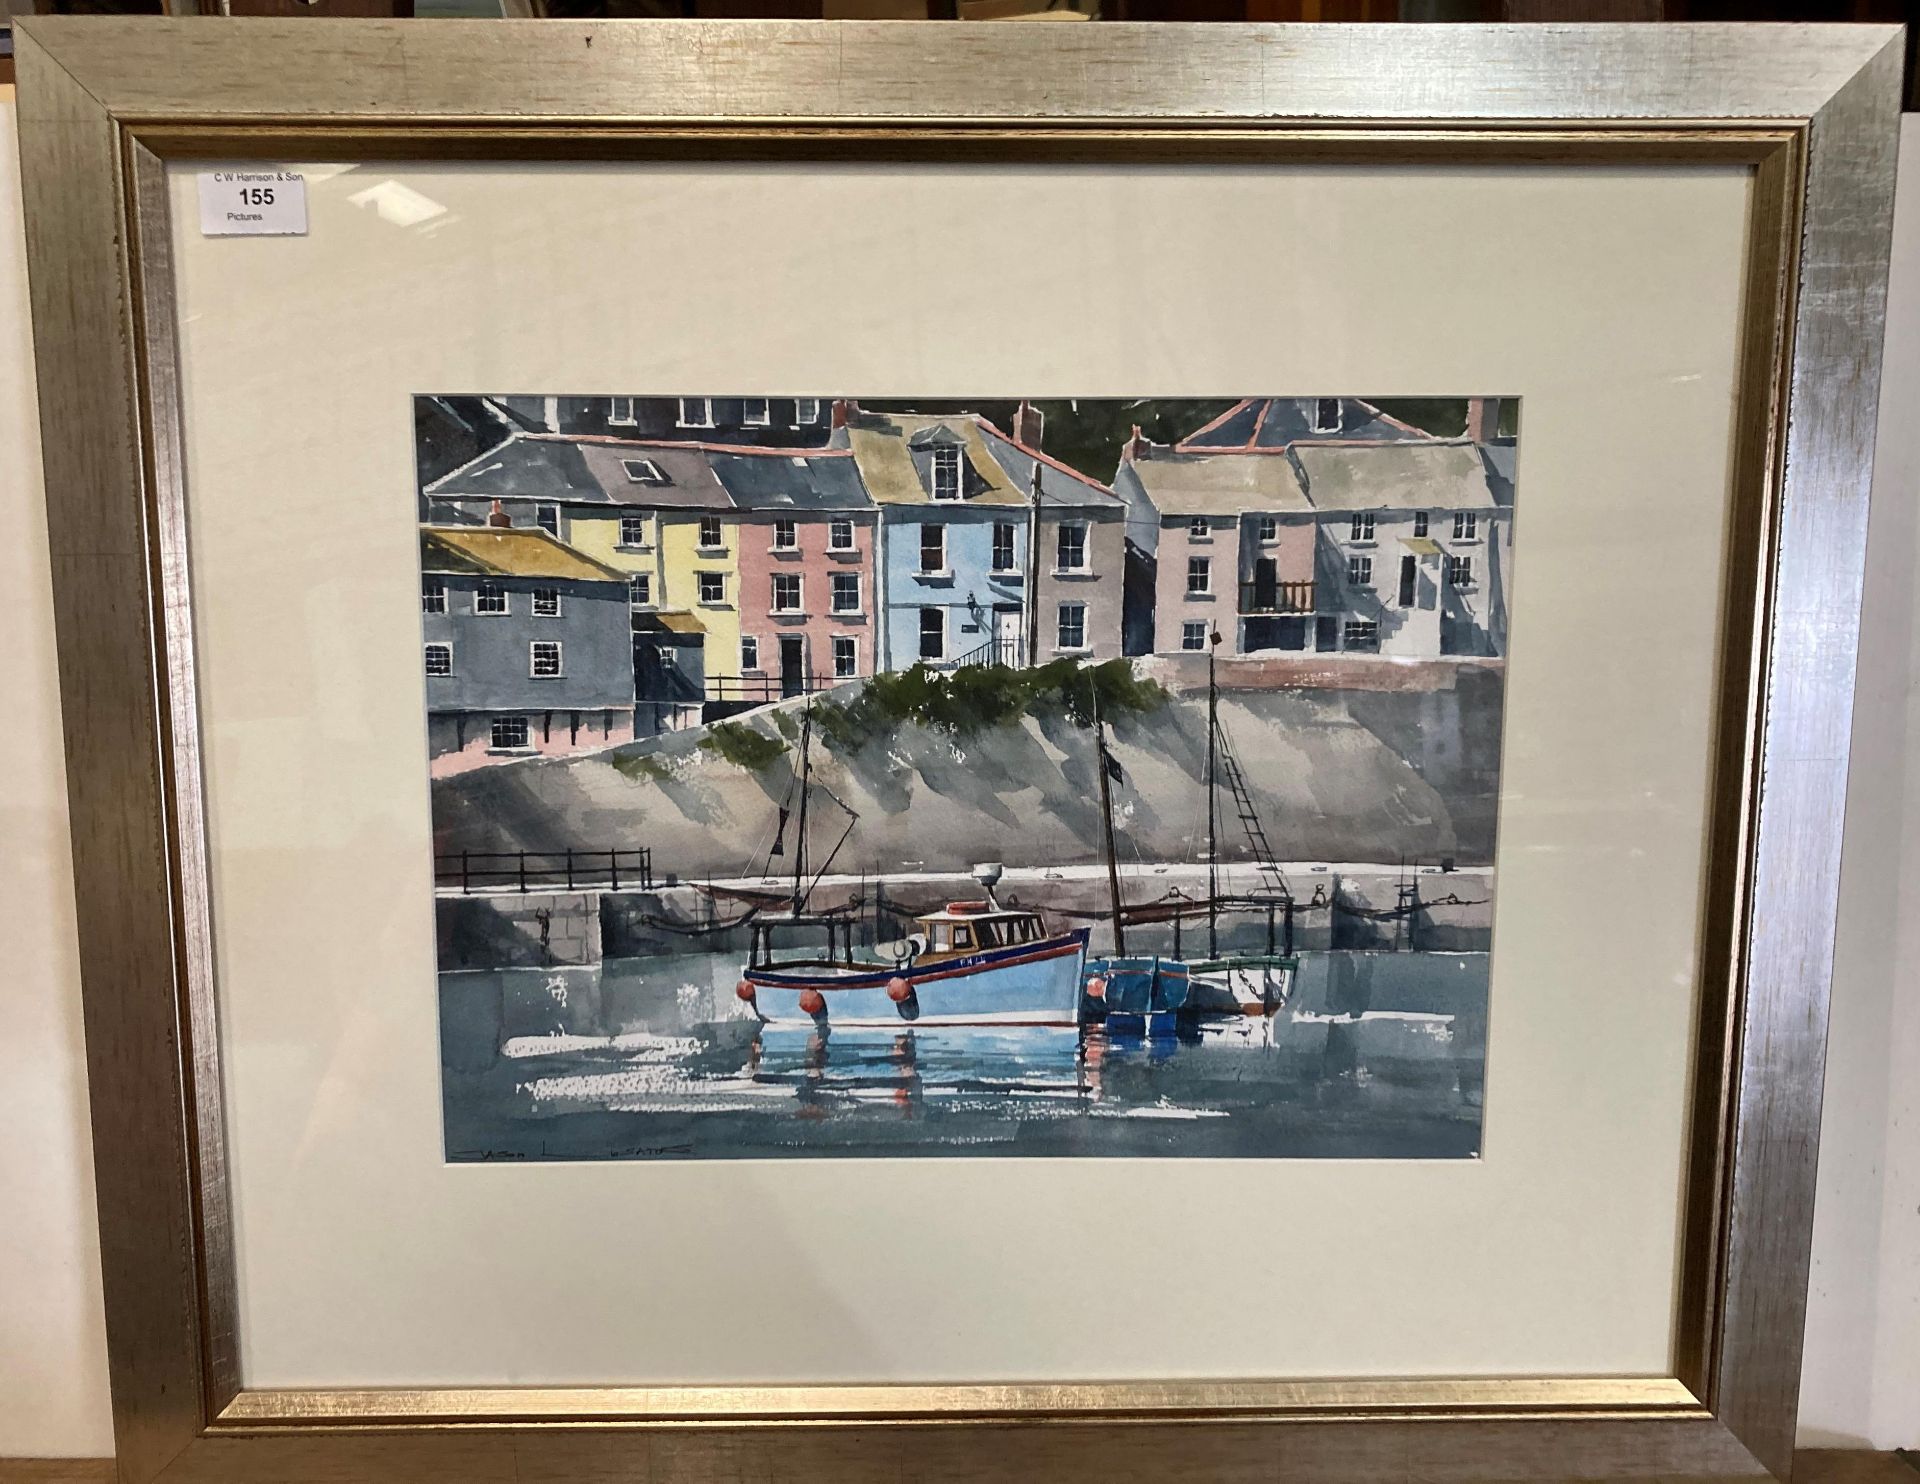 Jason L ? framed print 'Harbour with Houses in Background' 30cm x 42cm (Saleroom location: MA6)